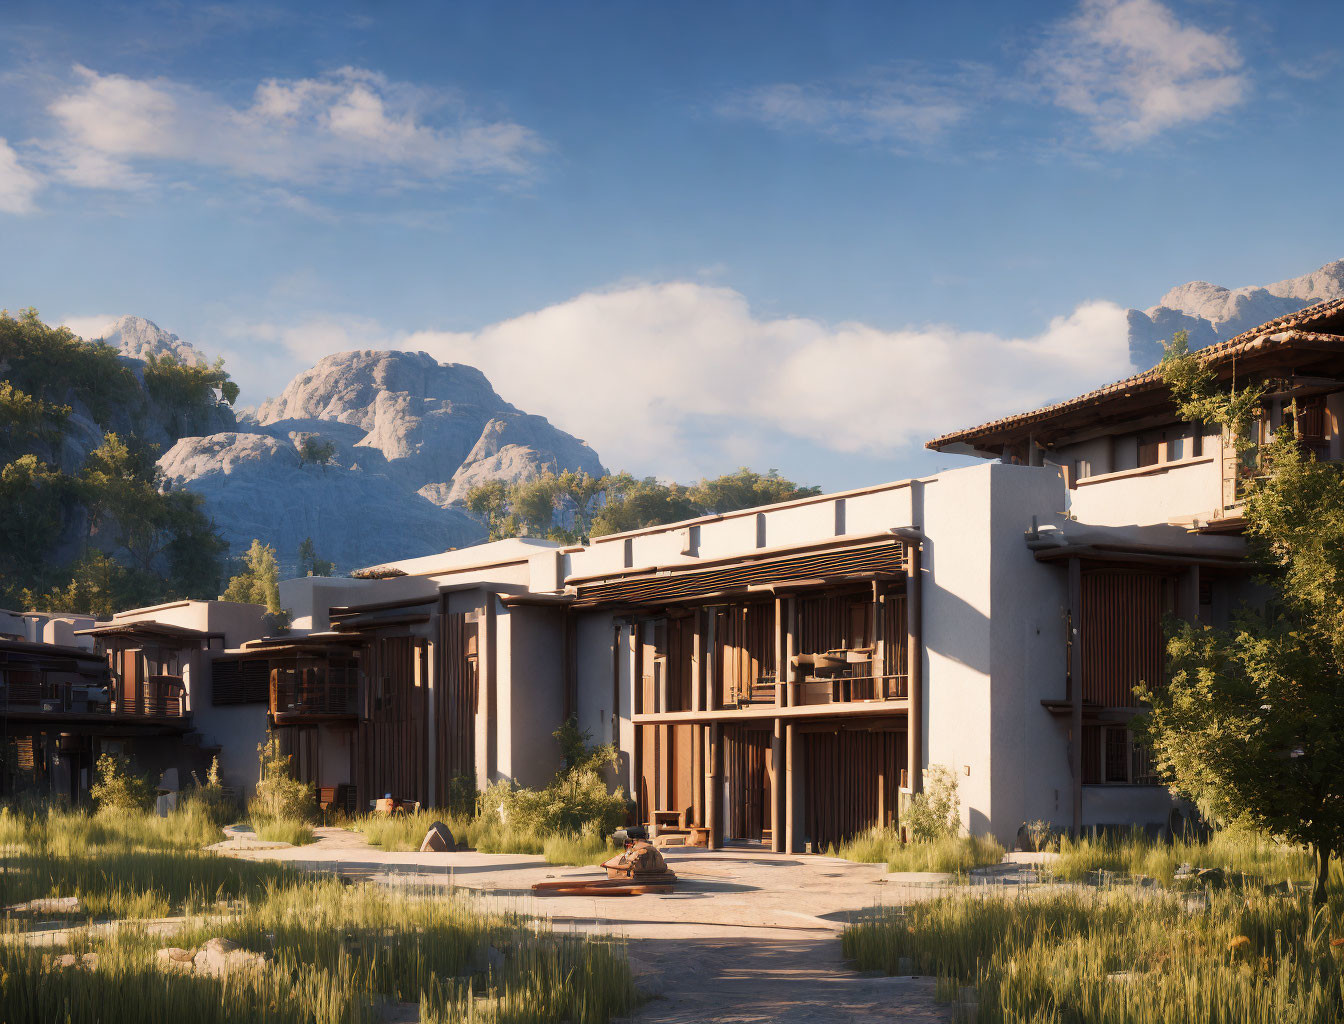 Rustic wooden buildings in tall grass with mountain backdrop